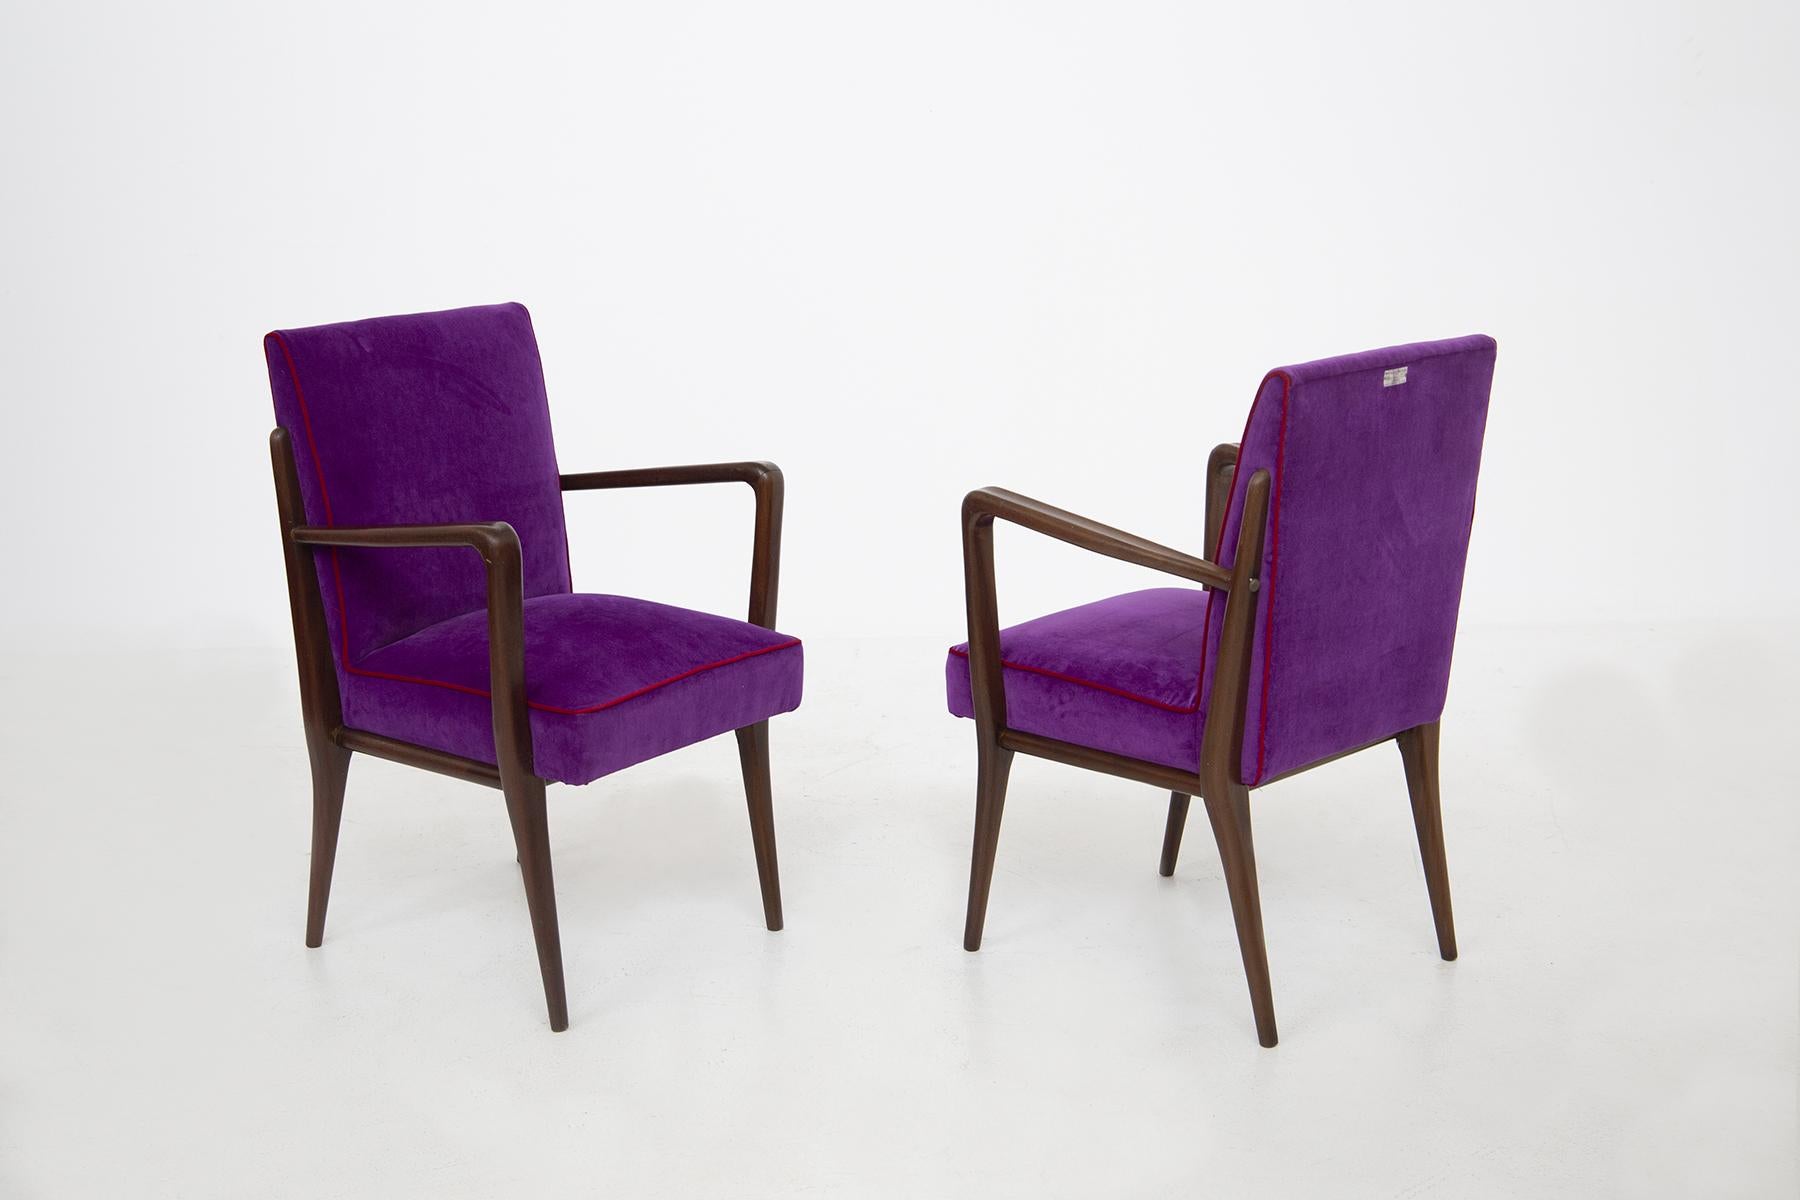 Elegant pair of 1950's Italian armchairs reupholstered in purple velvet fabric. Finishing the velvet seat is an elegant red velvet border that creates an elegant play of color. The frame is made of walnut wood with sharp, geometric lines. Behind the